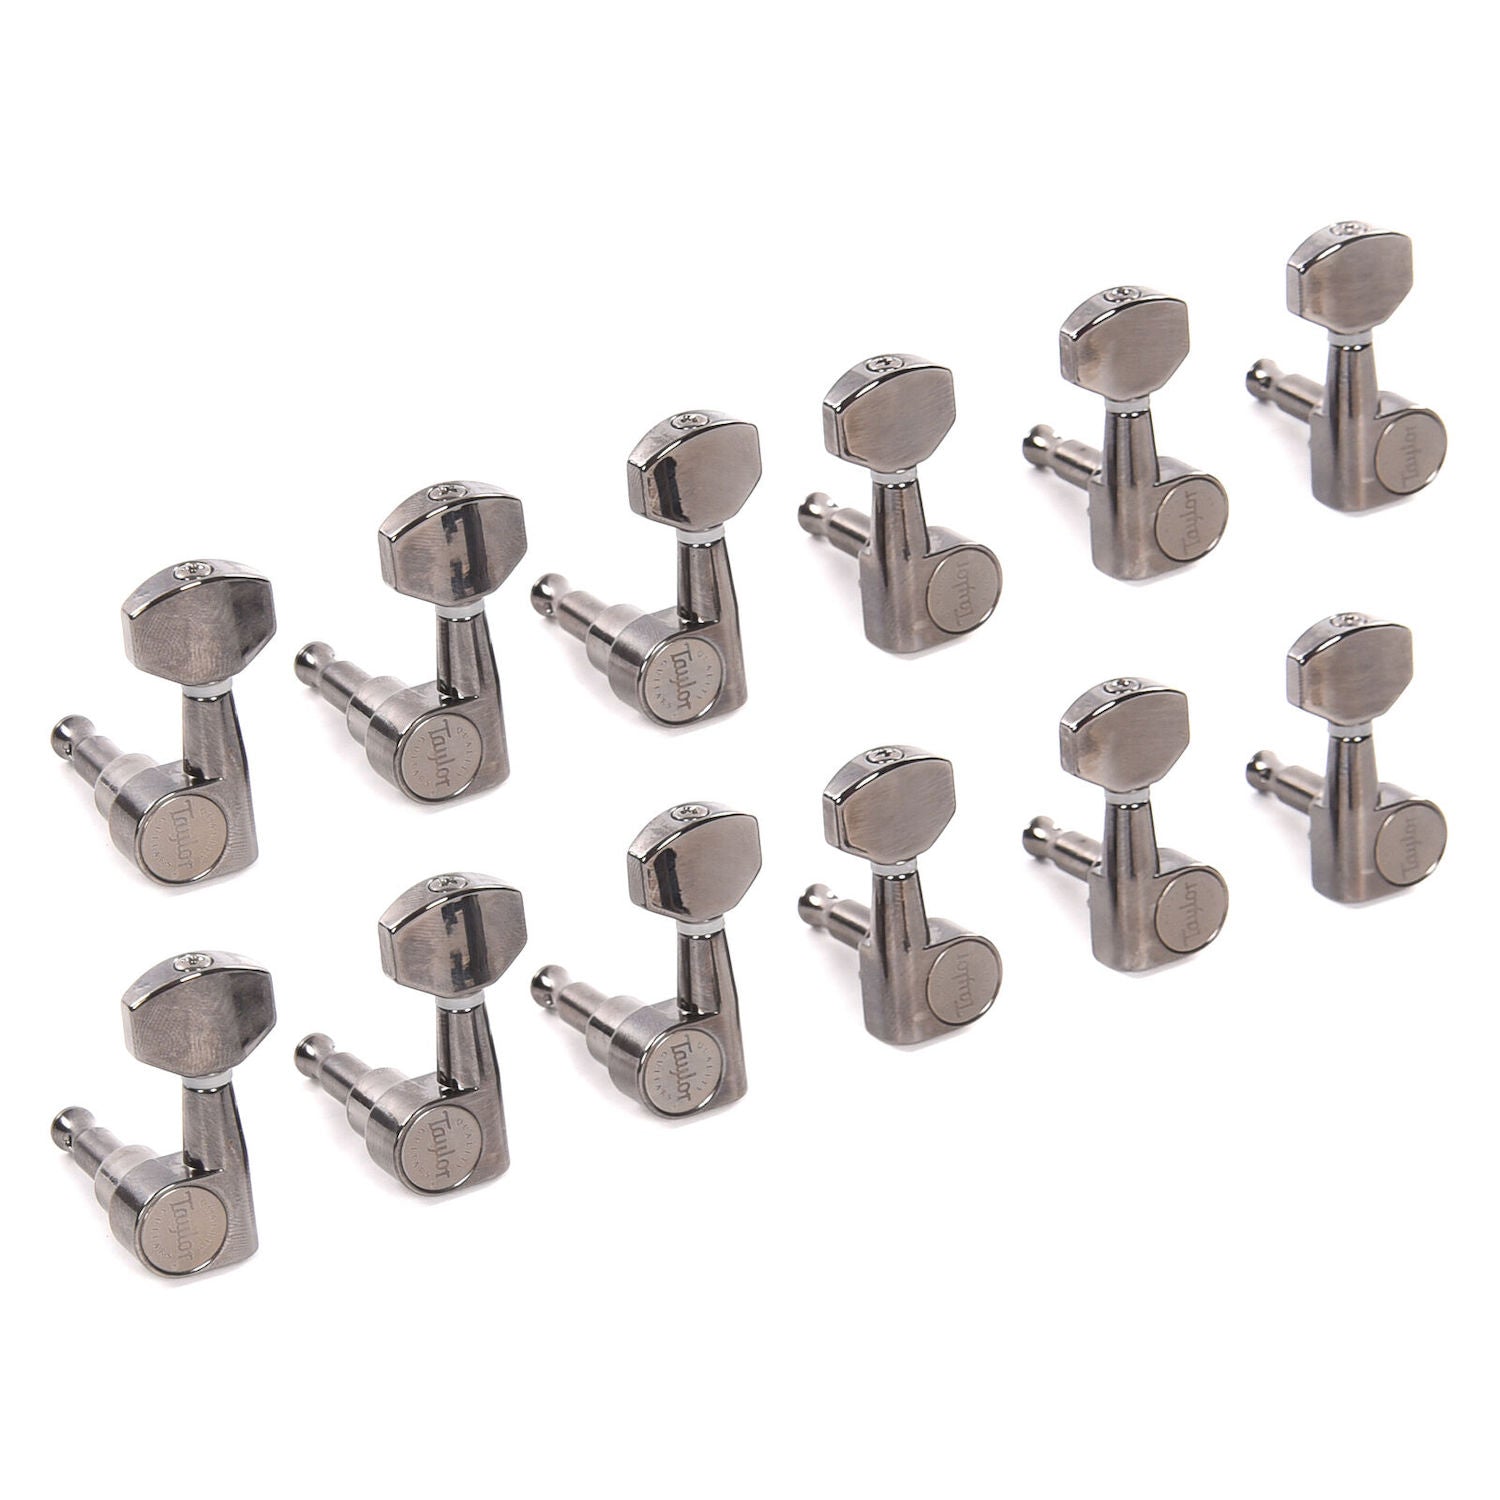 Taylor Guitar Tuning Heads,1:18,12St,Smoked Nickel